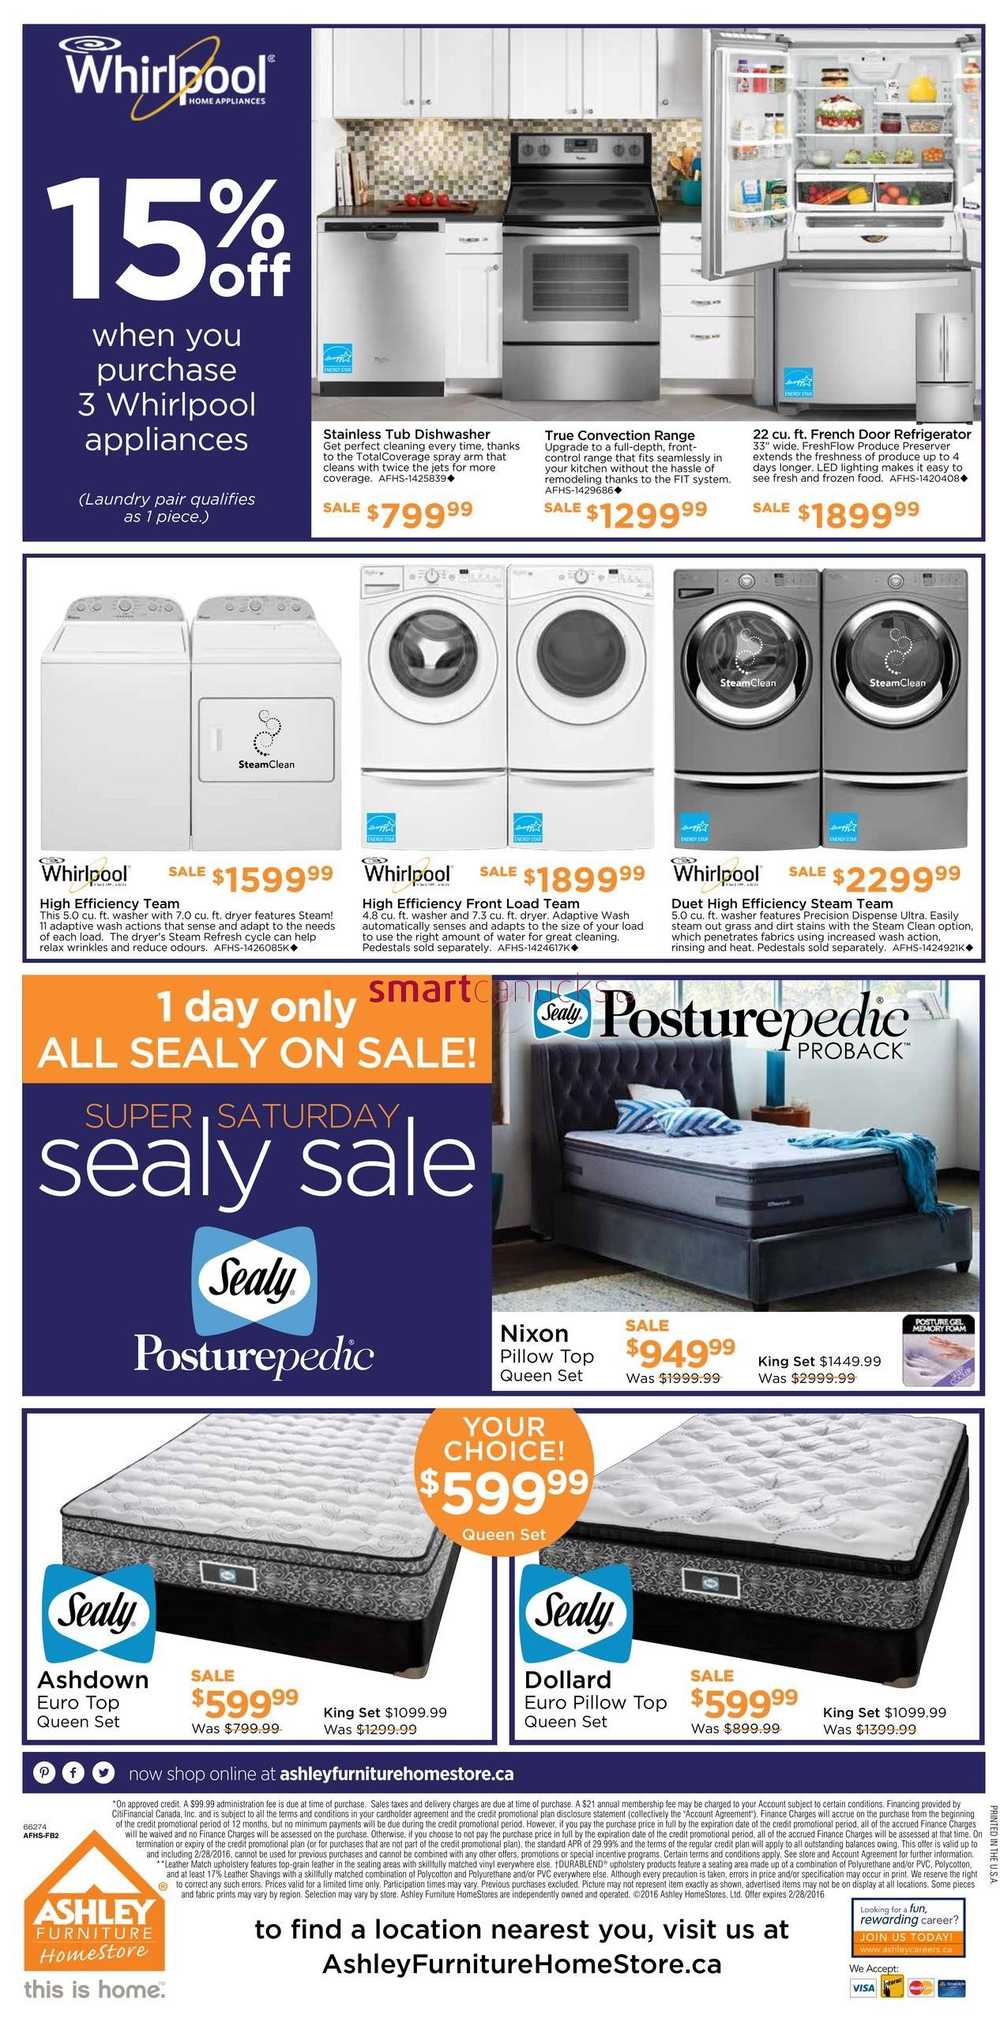 Ashley Furniture HomeStore (West) Weekend Sale Flyer February 26 to 28